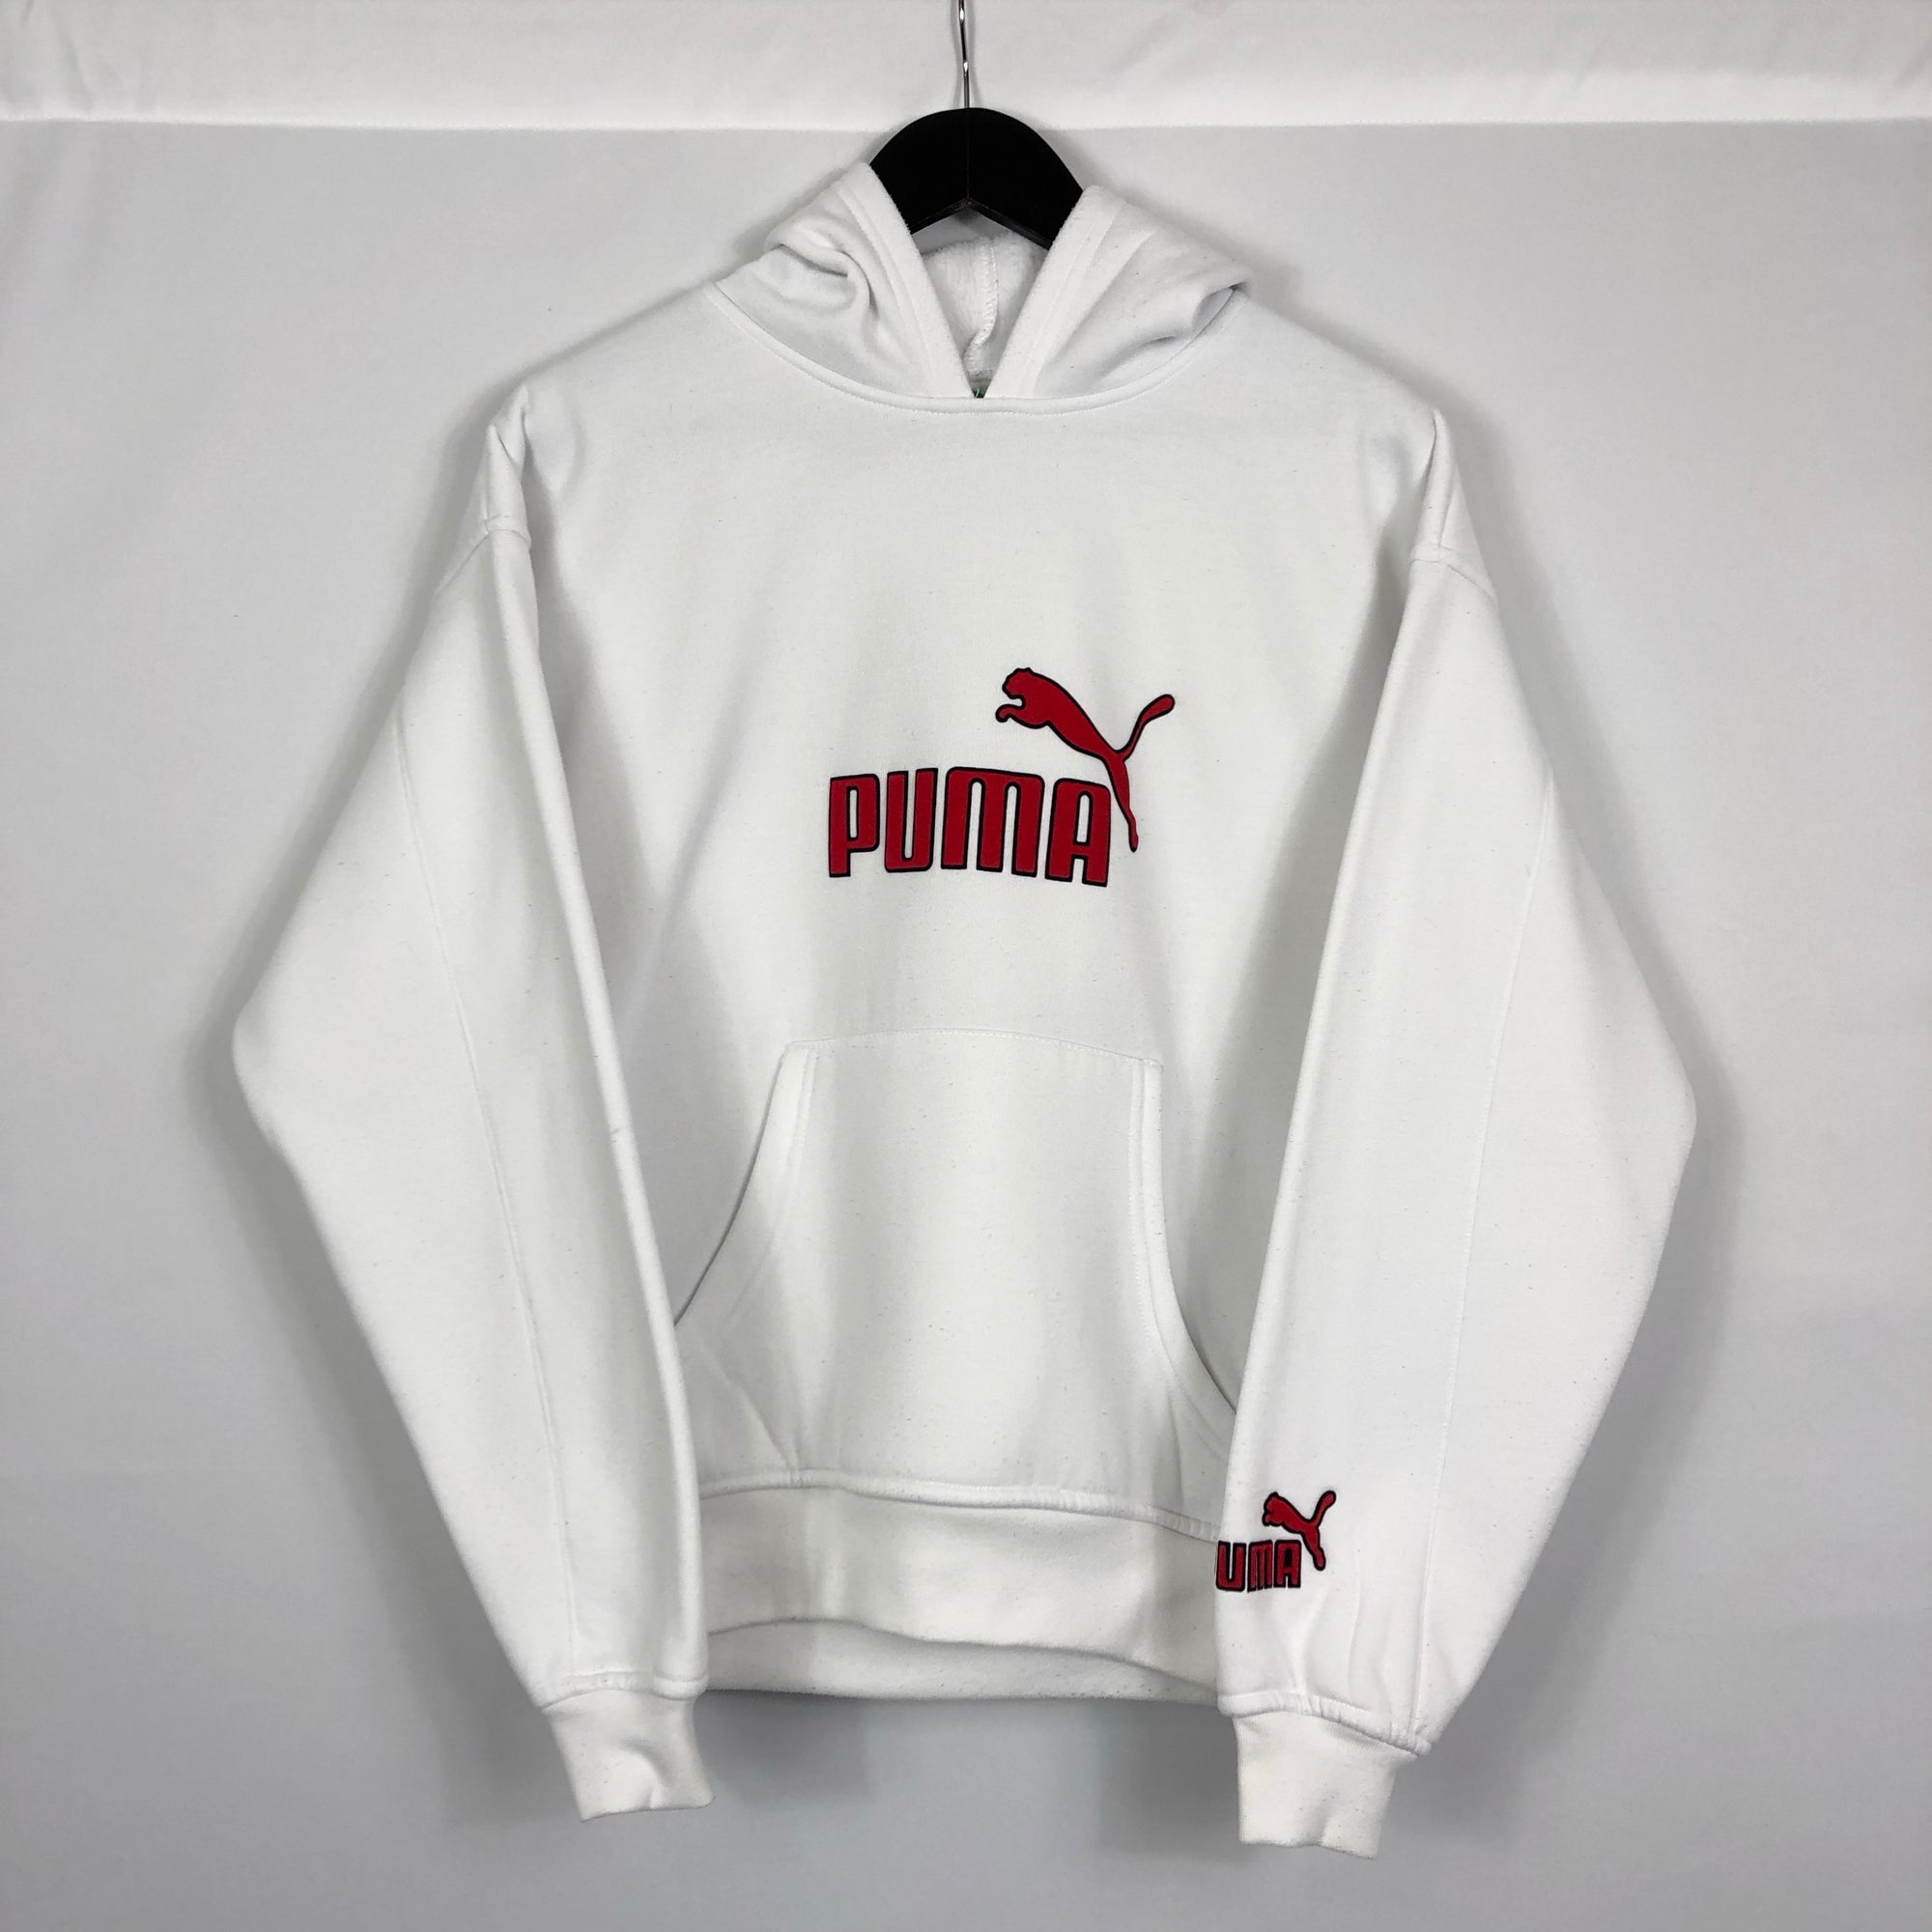 Vintage Puma Spellout Hoodie in White - Small